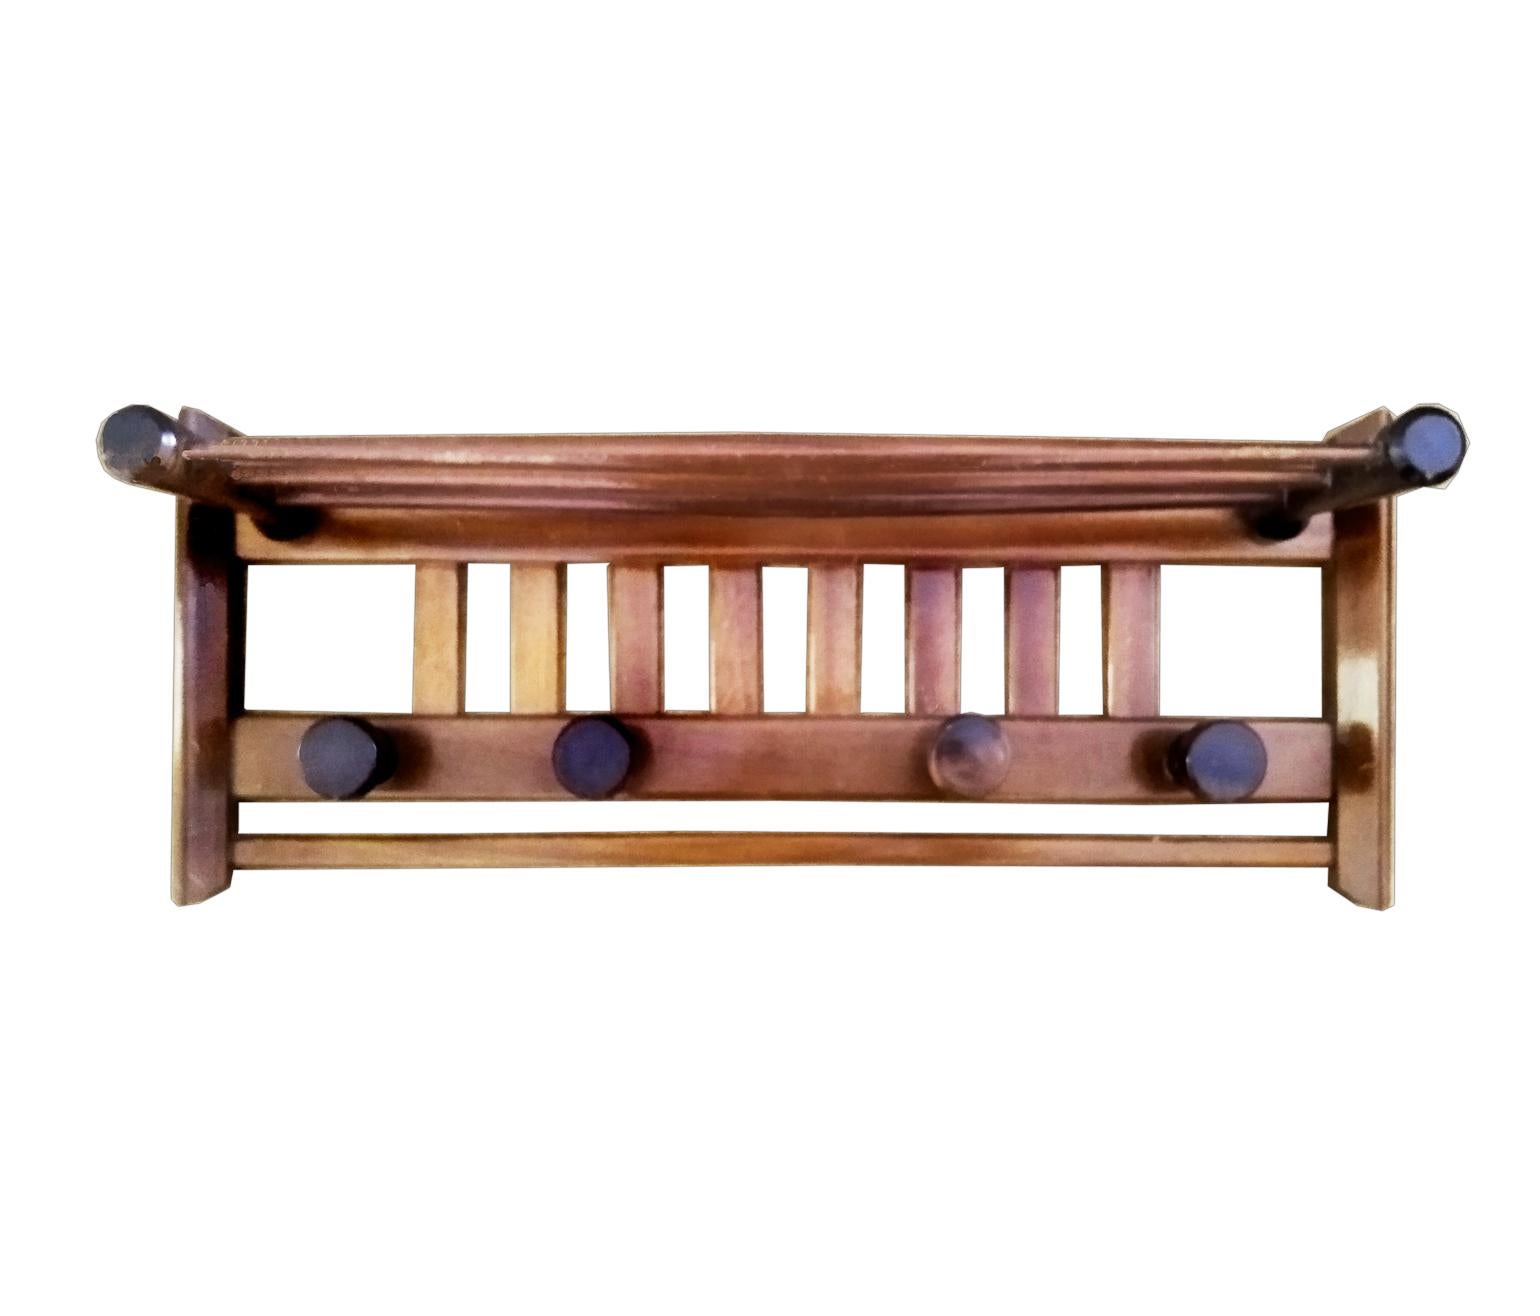 Large Wood coat rack from the mid 20th century
Excellent conditions

Perfect for entering your home to hang your bags coats
It has a top shelf to support the hats

Elegant and functional coat rack.

